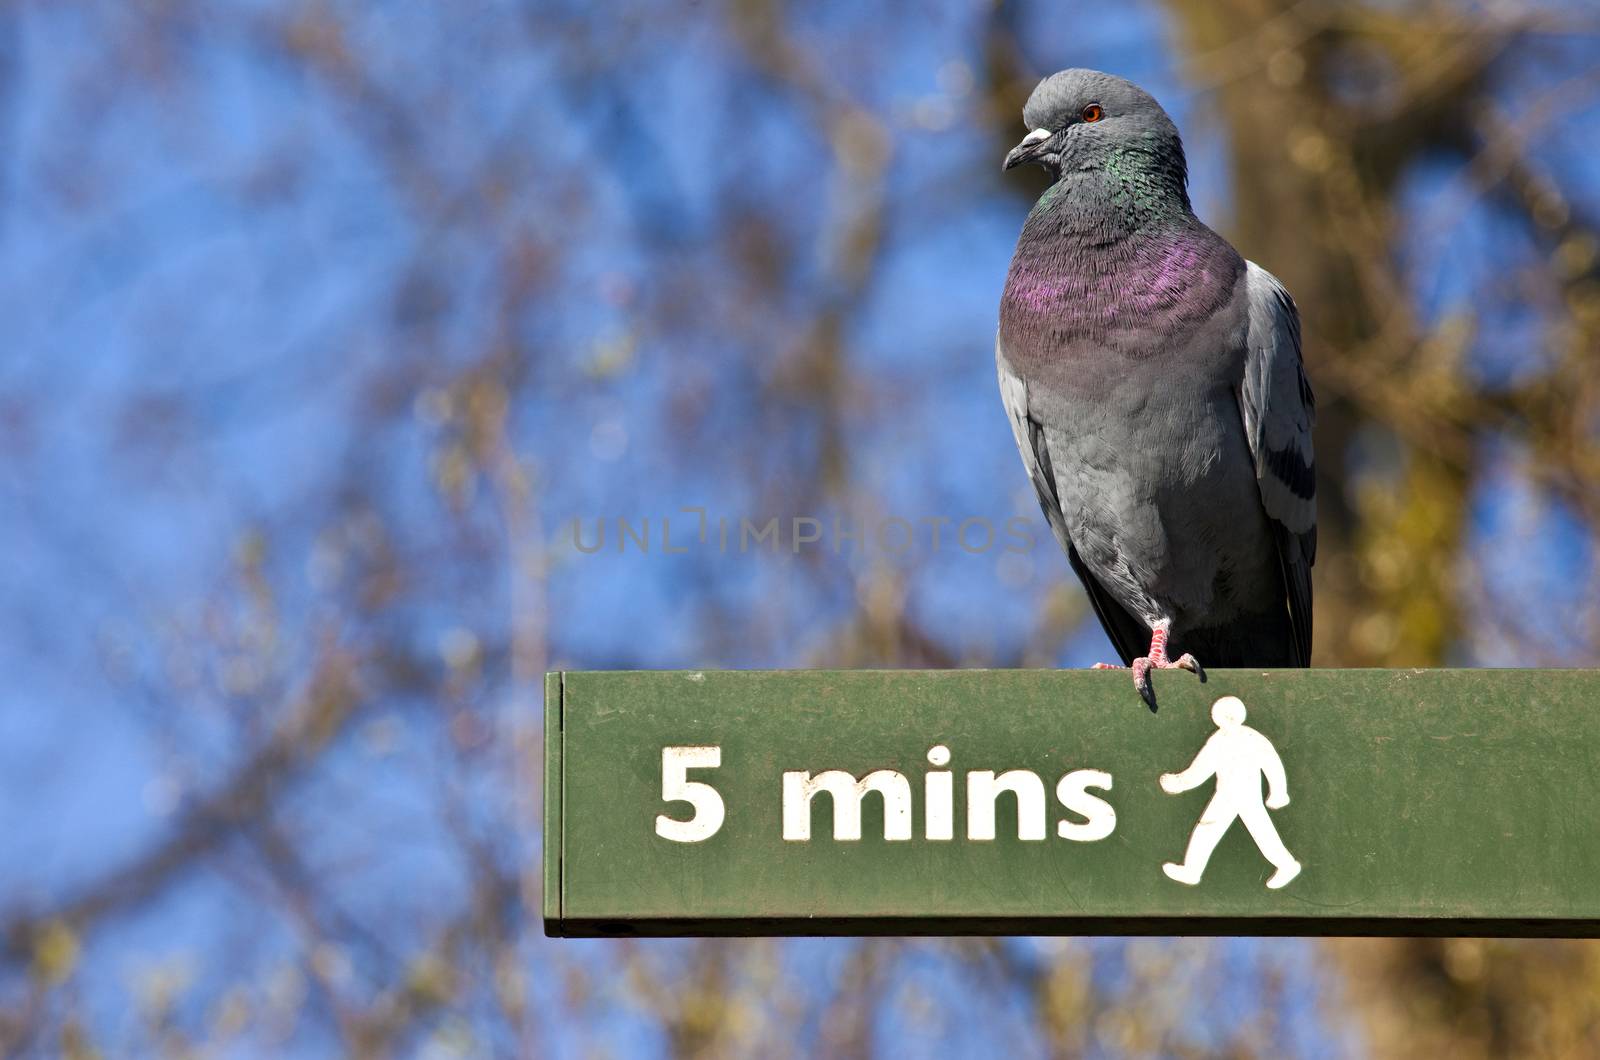 A pigeon on a Pedestrian Signpost in London's St. James's Park.